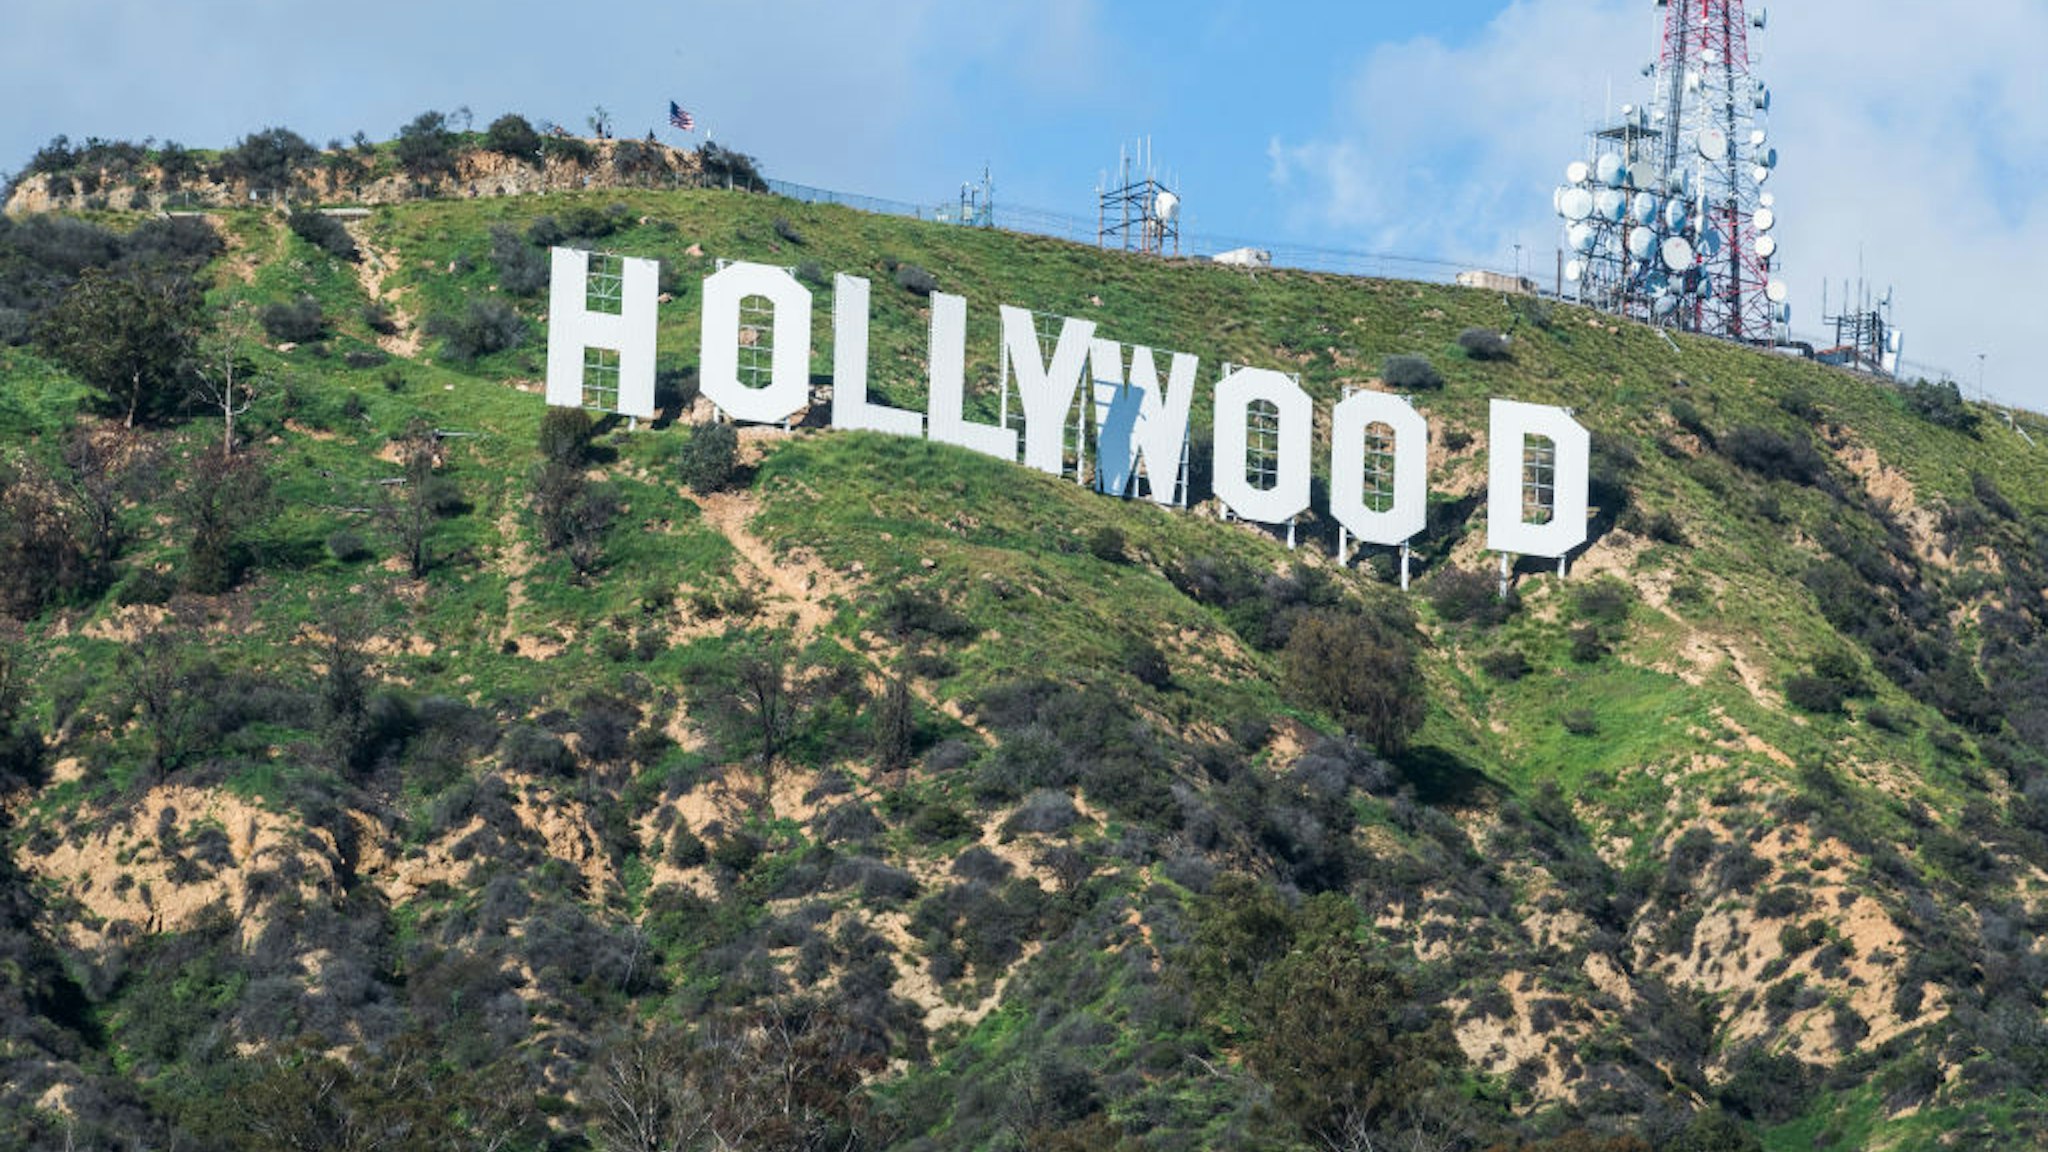 Scenes of the Hollywood sign On March 5th 2017 in Los Angeles, United States of America.